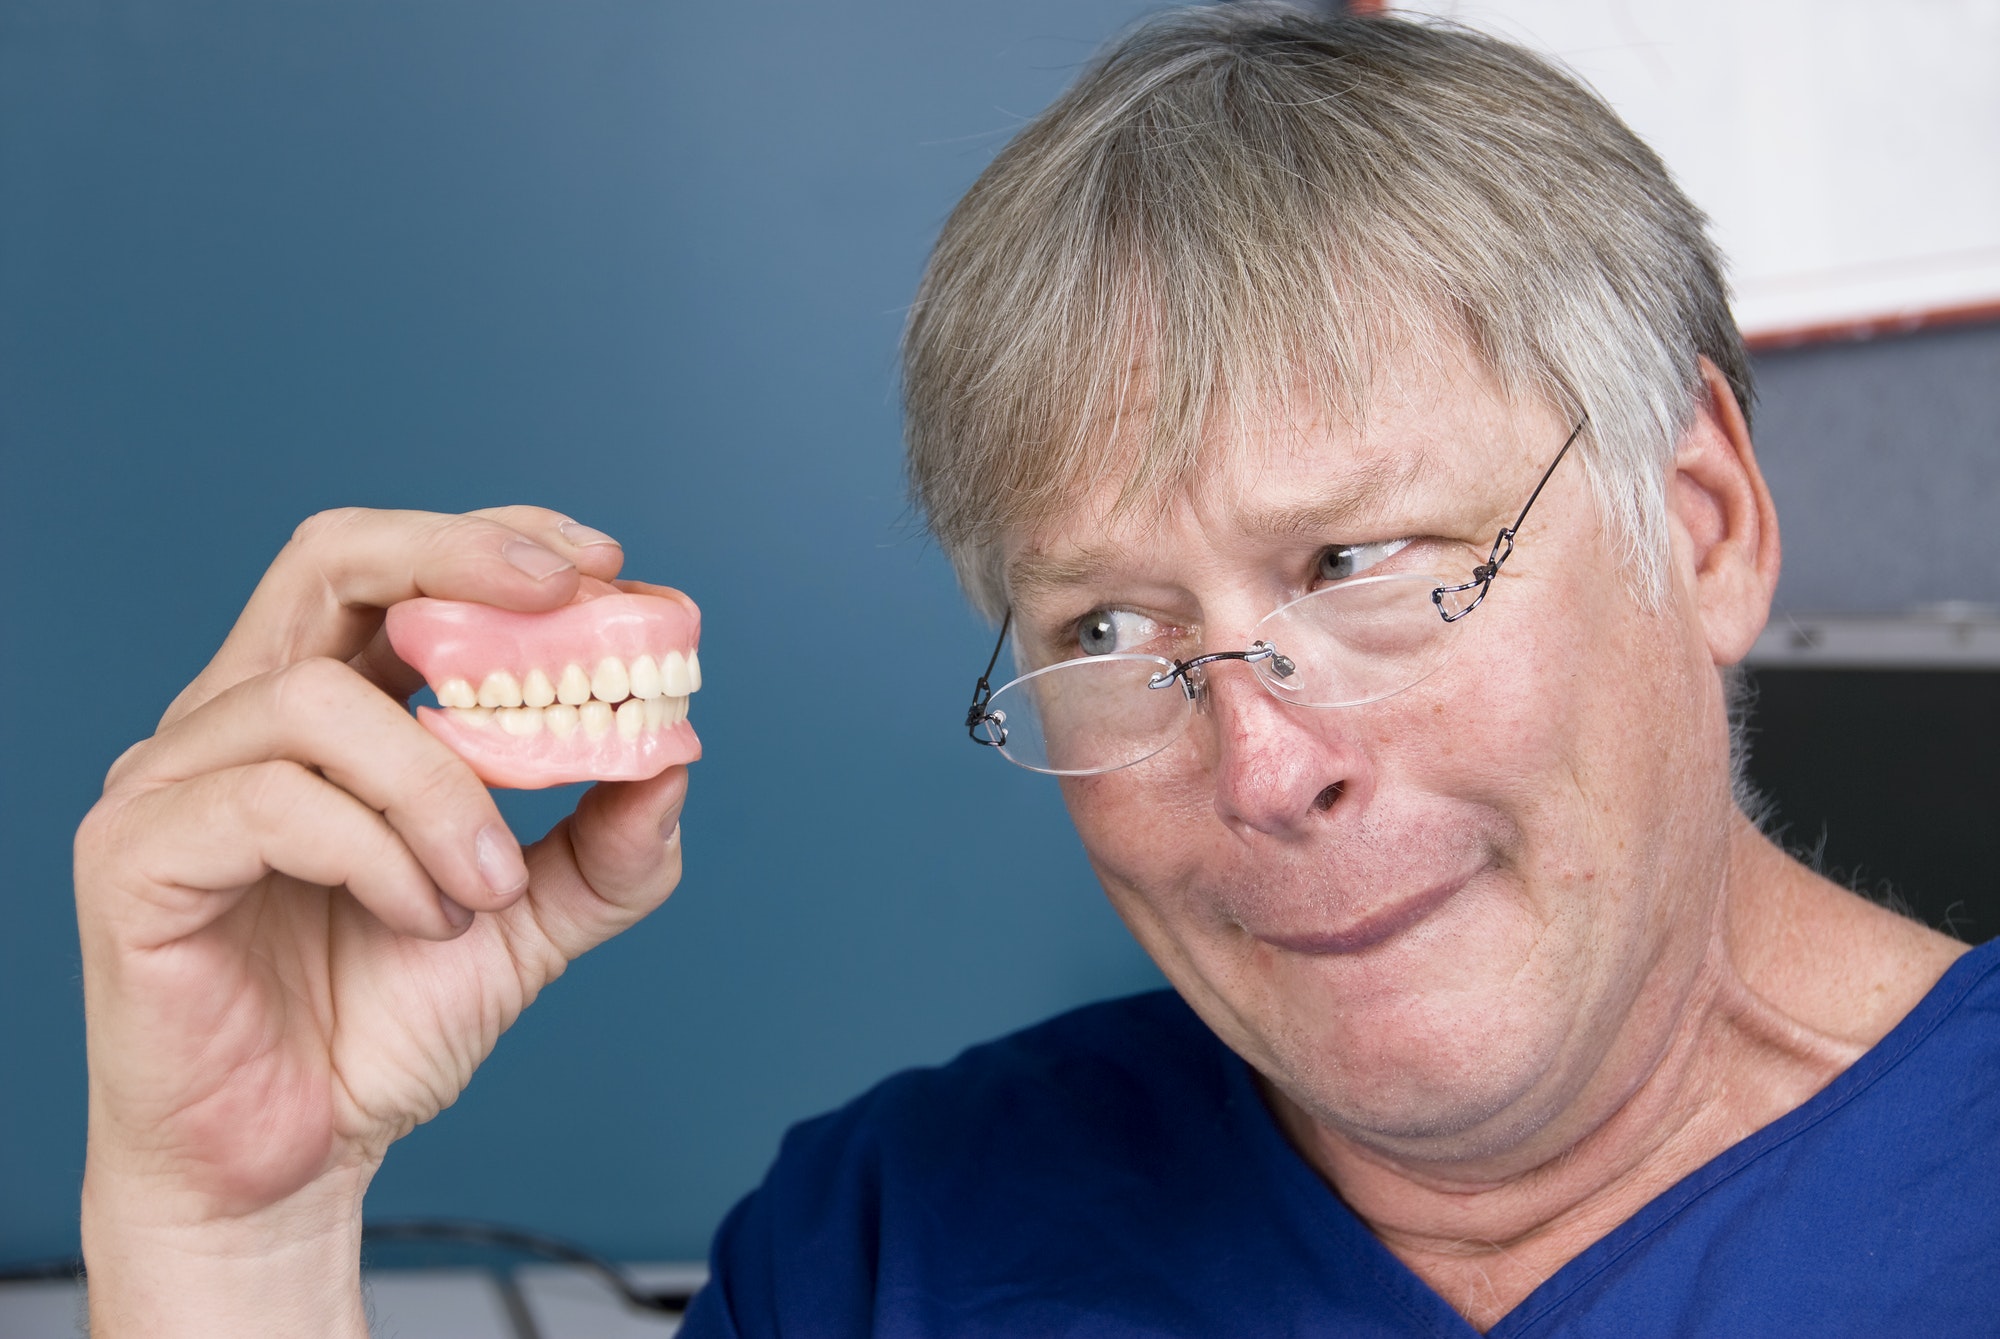 Man examining his new dentures, expertly crafted by Lance Family Dental, showcasing quality dental prosthetics.